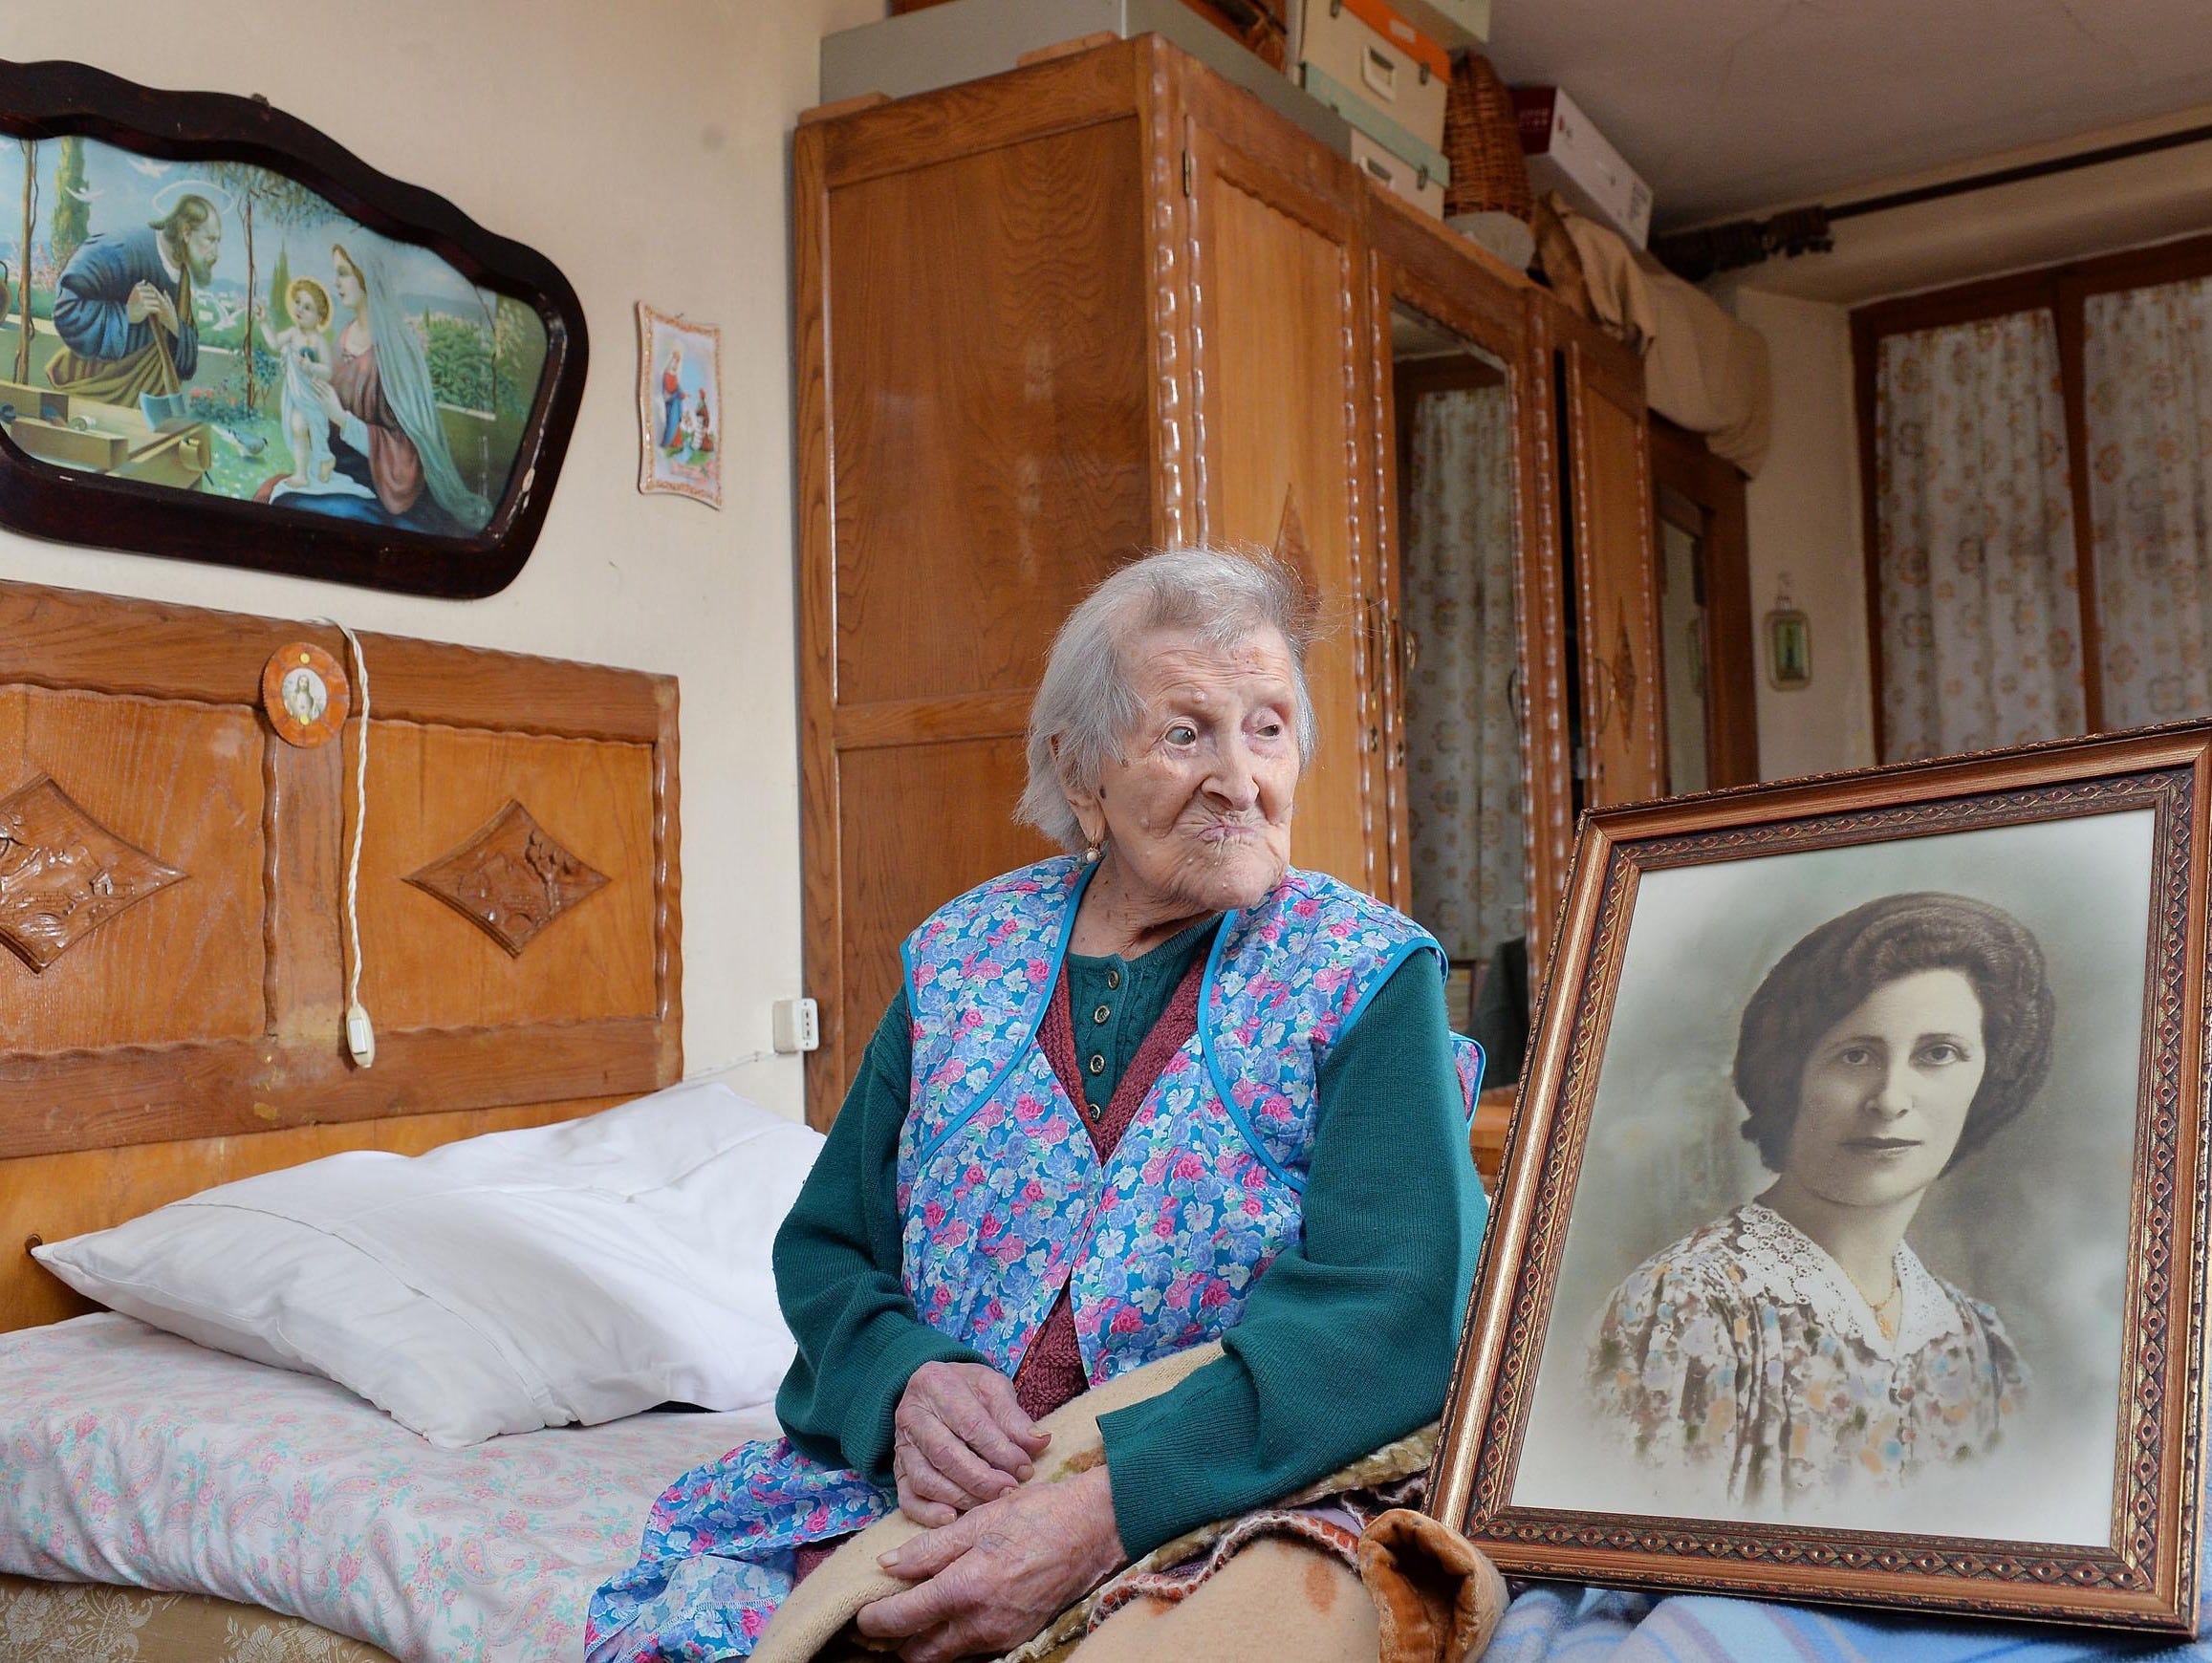 Emma Morano, then 116, sits in her apartment next to a picture depicting her when she was young in Verbania, Northern Italy.